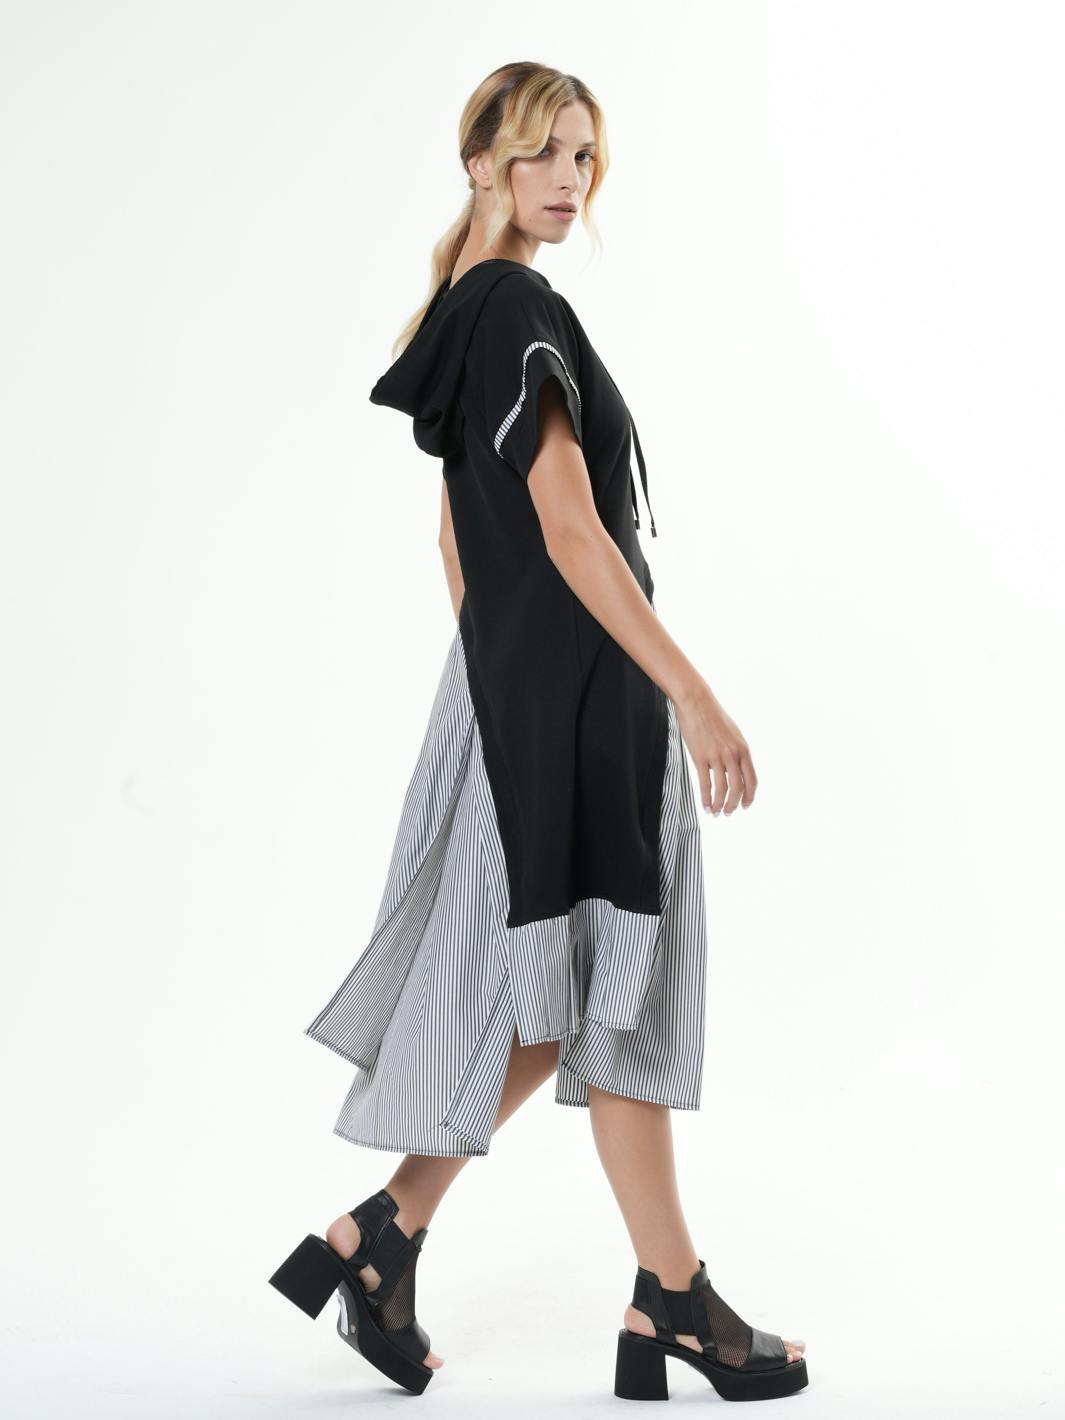 Thumbnail preview #6 for Asymmetric Hooded Dress With Short Sleeves 